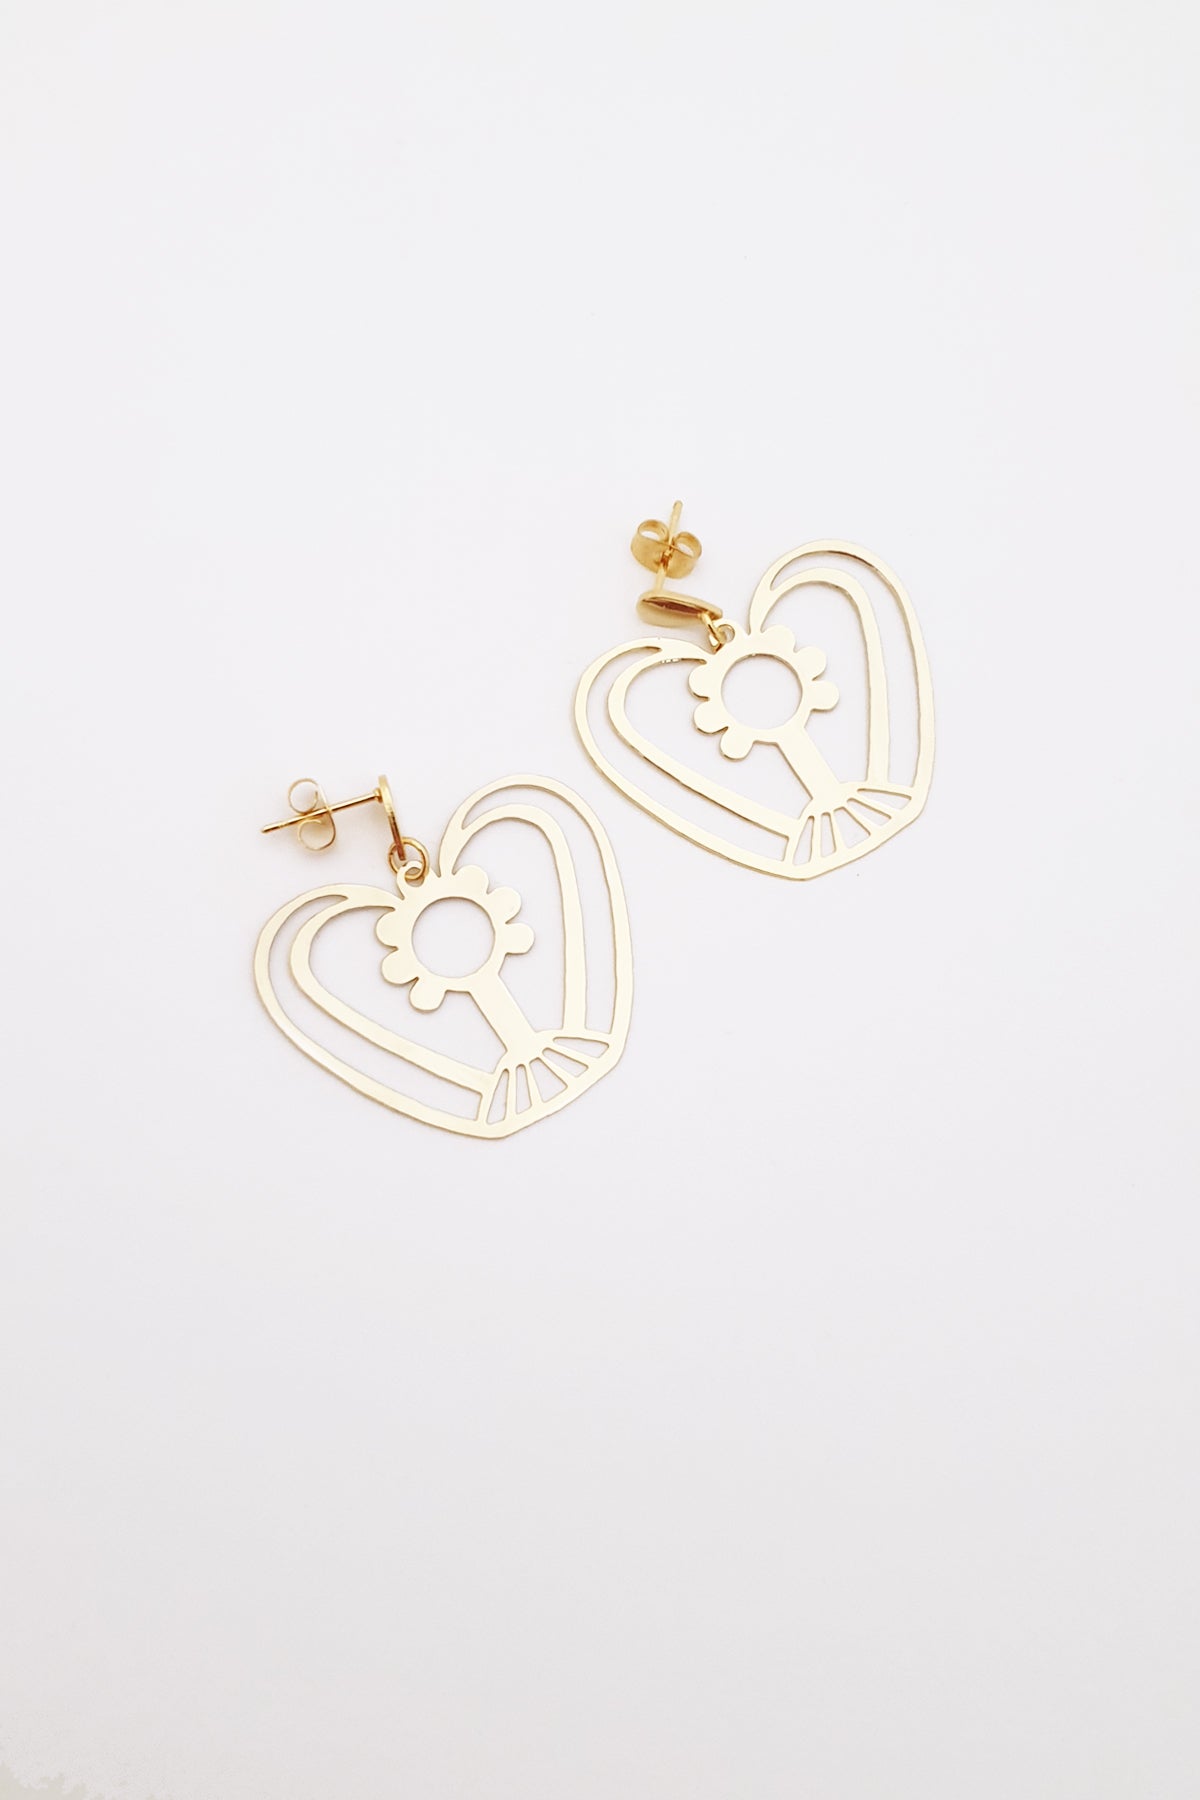 A pair of statement gold plated brass earrings sit angled against a white background. They feature a small gold stud top, and a custom brass geometric shape that resembles a lady with curly hair with her arms above her head in the shape of a heart.